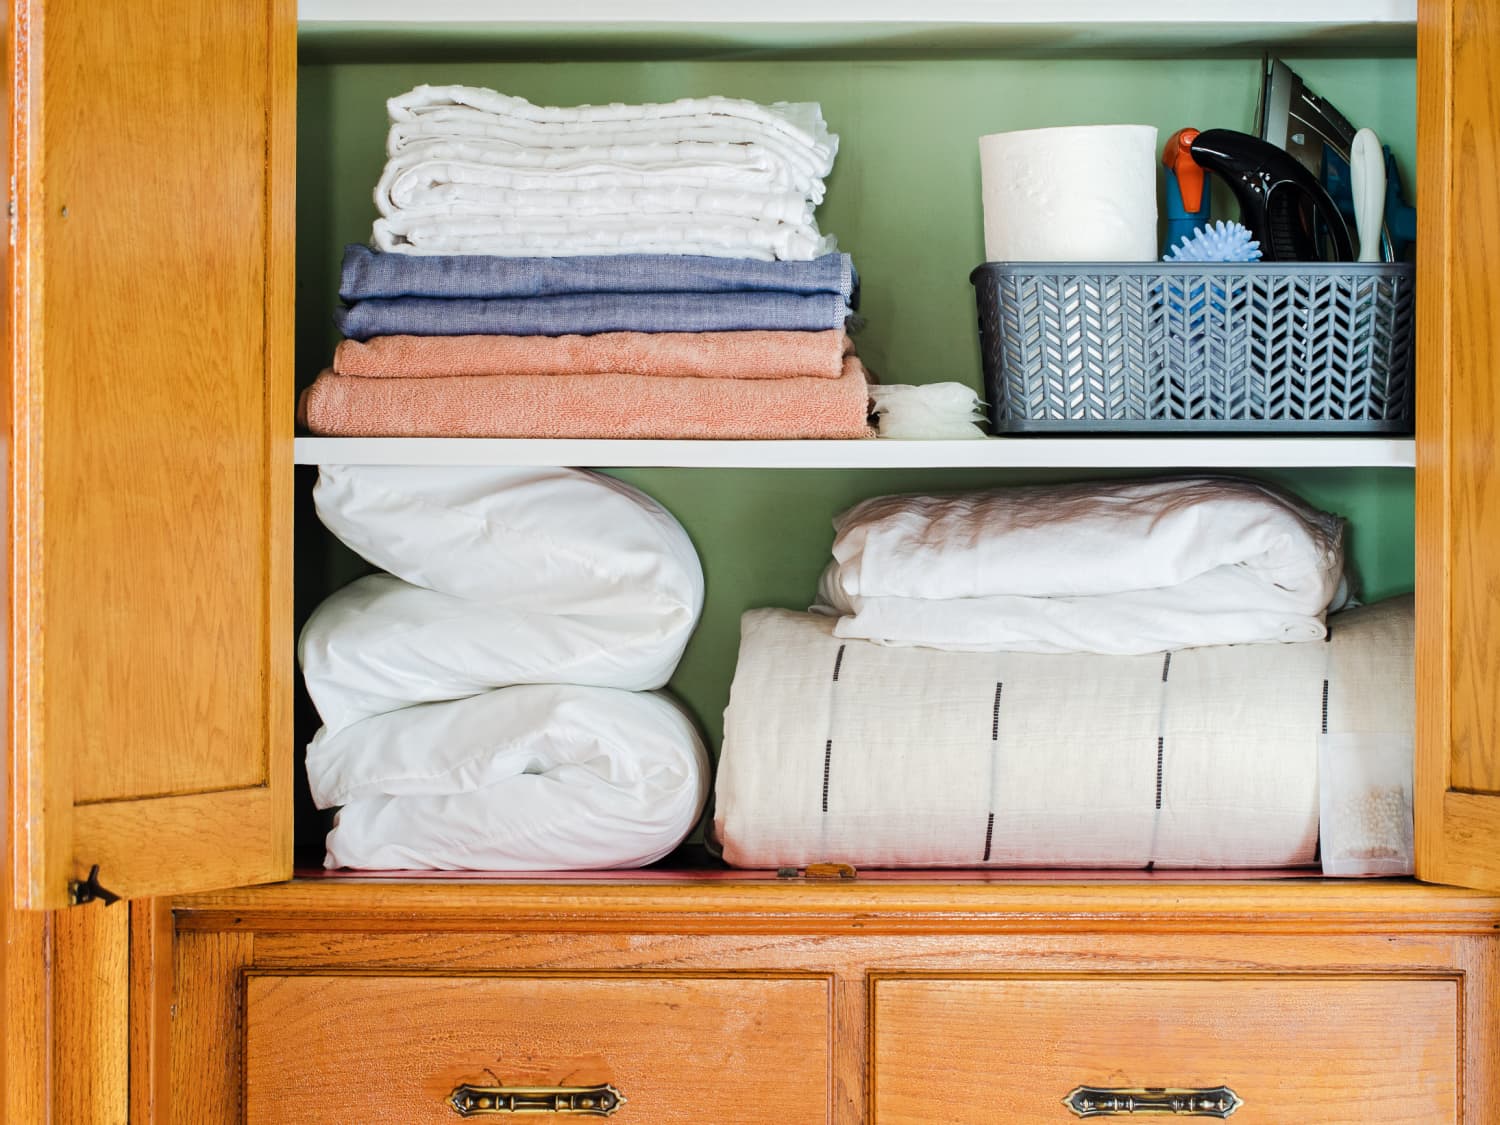 6 Ways to Get More Space Out of a Tiny Linen Closet